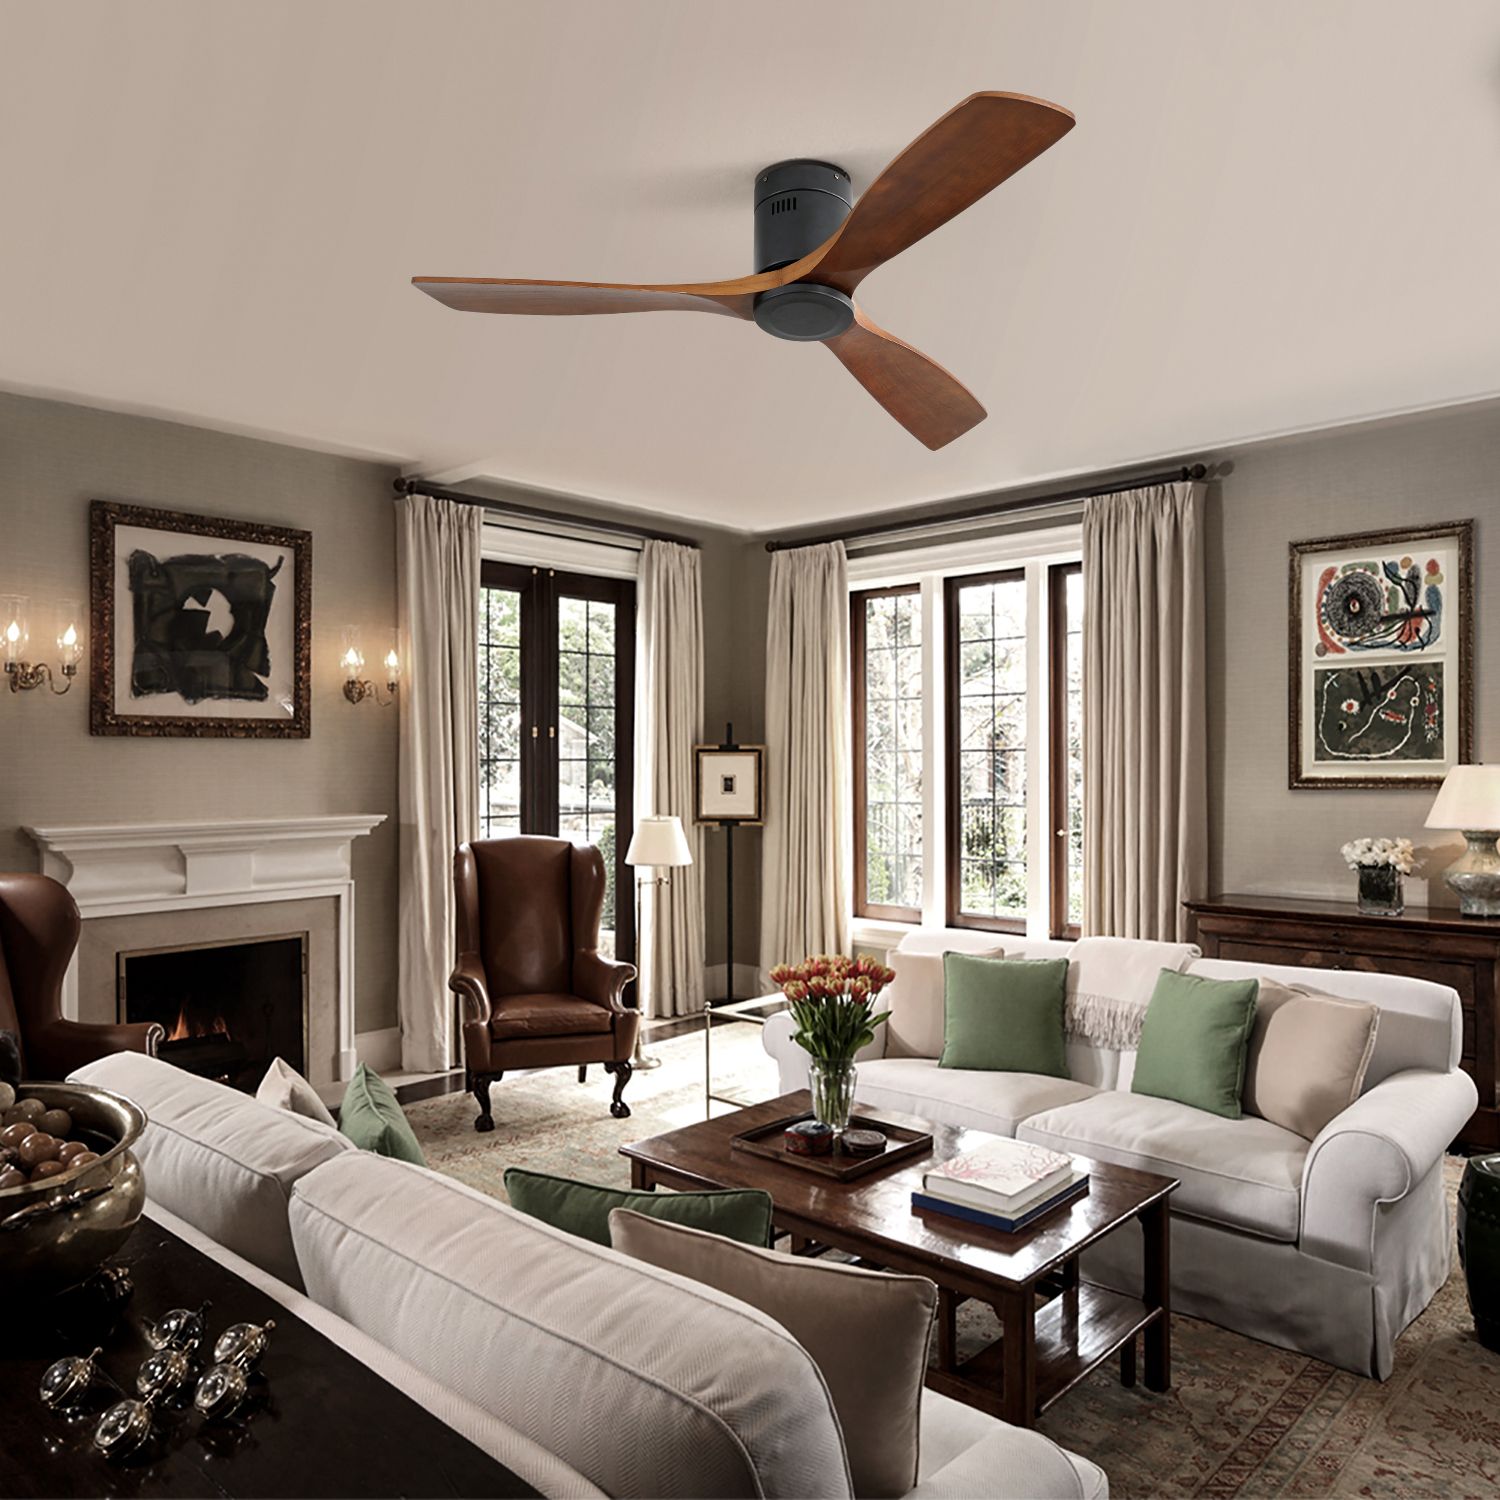 KBS low profile matte black and wood ceiling fan in living room